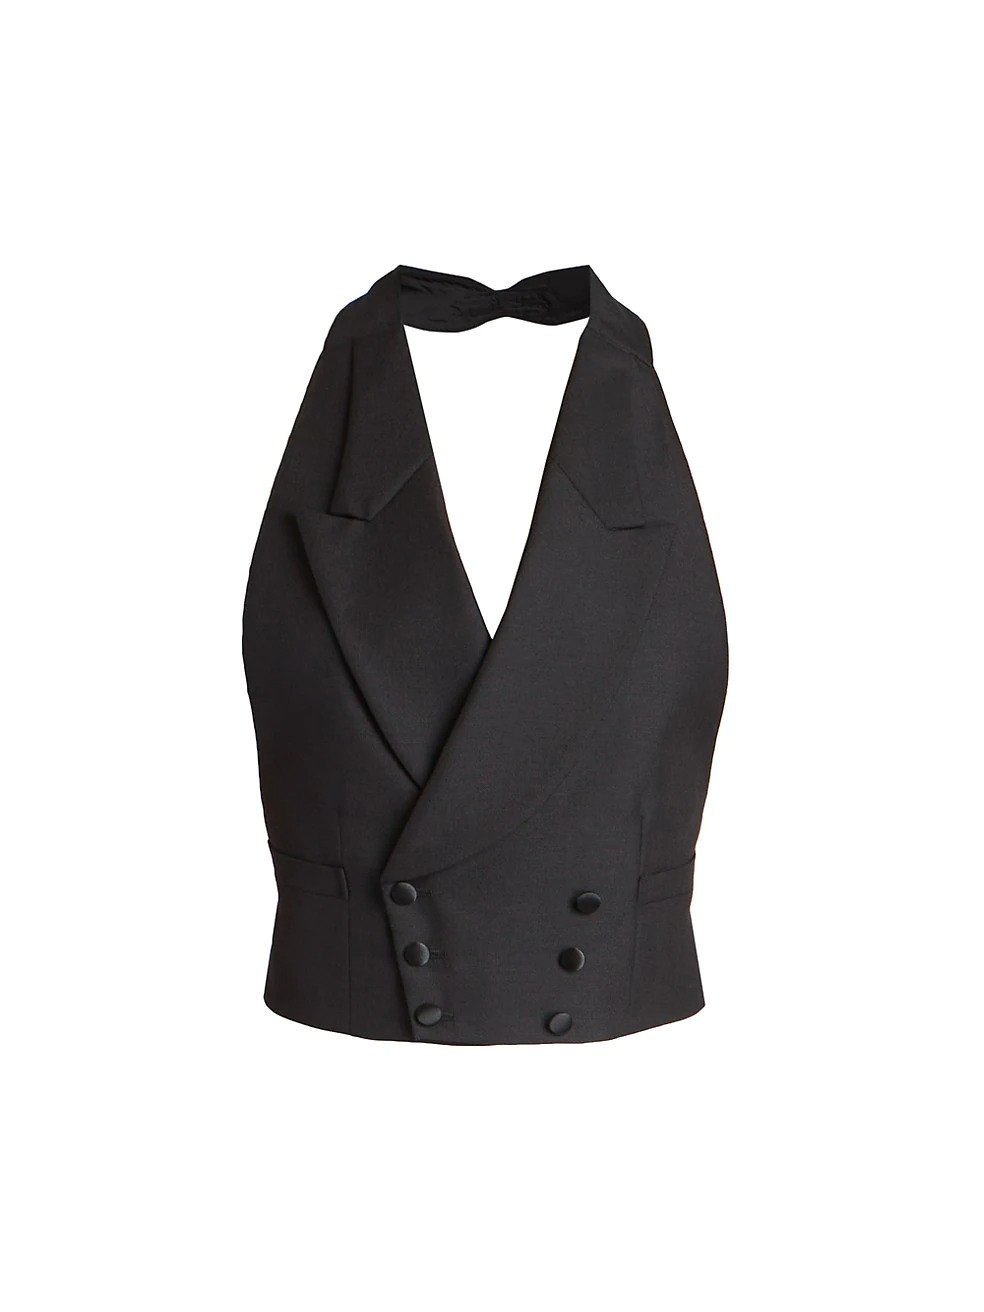 Suit vests and waistcoats for women from luxury designers, including boxy and classic cuts, and fashion versions in linen and corduroy.